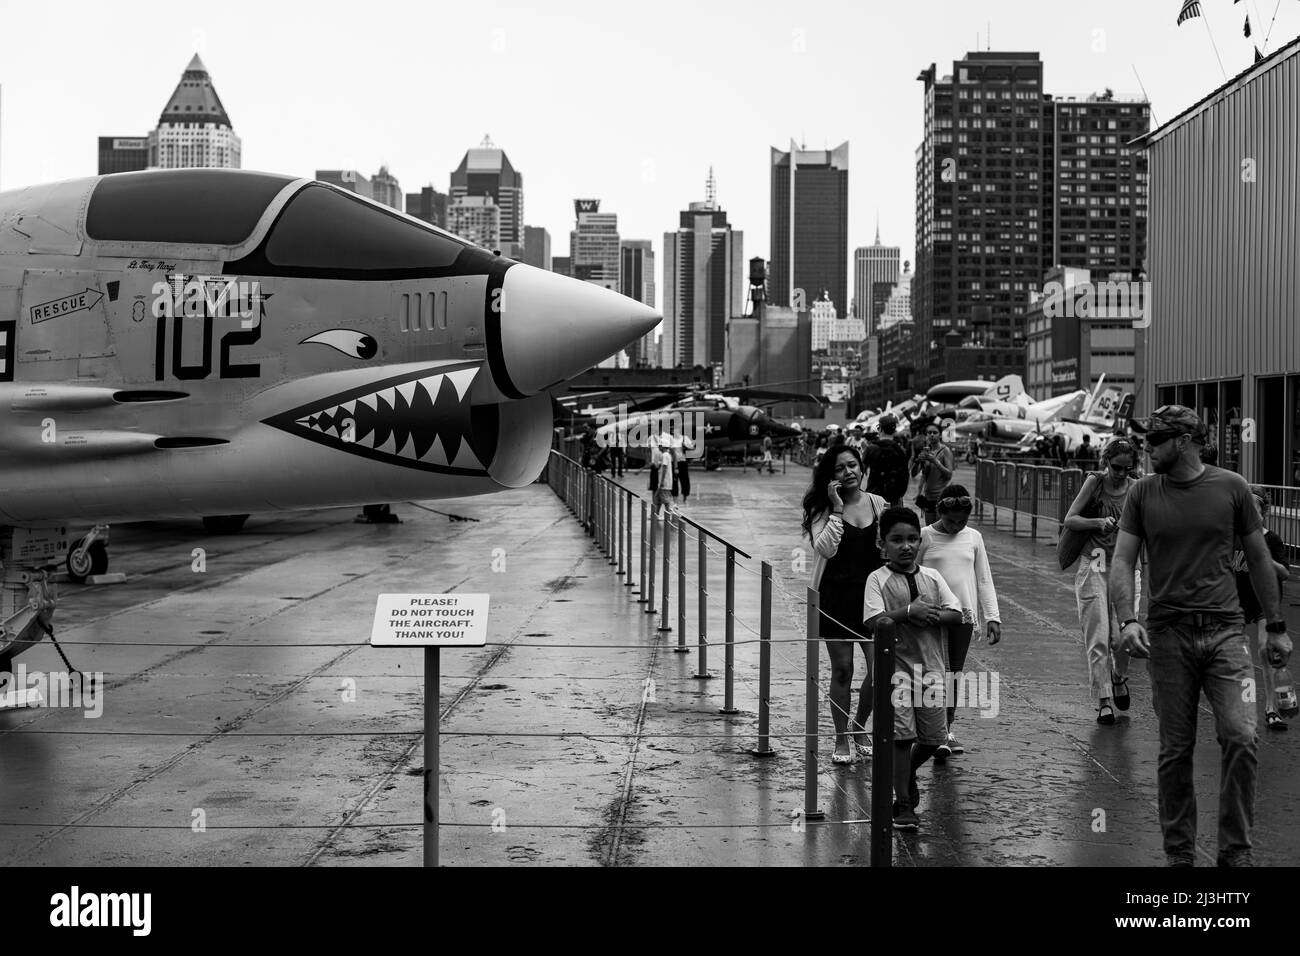 12 Av/W 46 Street, New York City, NY, USA, A family walks by the carrier-based Fighter Vought F-8K Crusader on the upper deck of the Intrepid Sea, Air & Space Museum - an american military and maritime history museum showcases the aircraft carrier USS Intrepid. Stock Photo